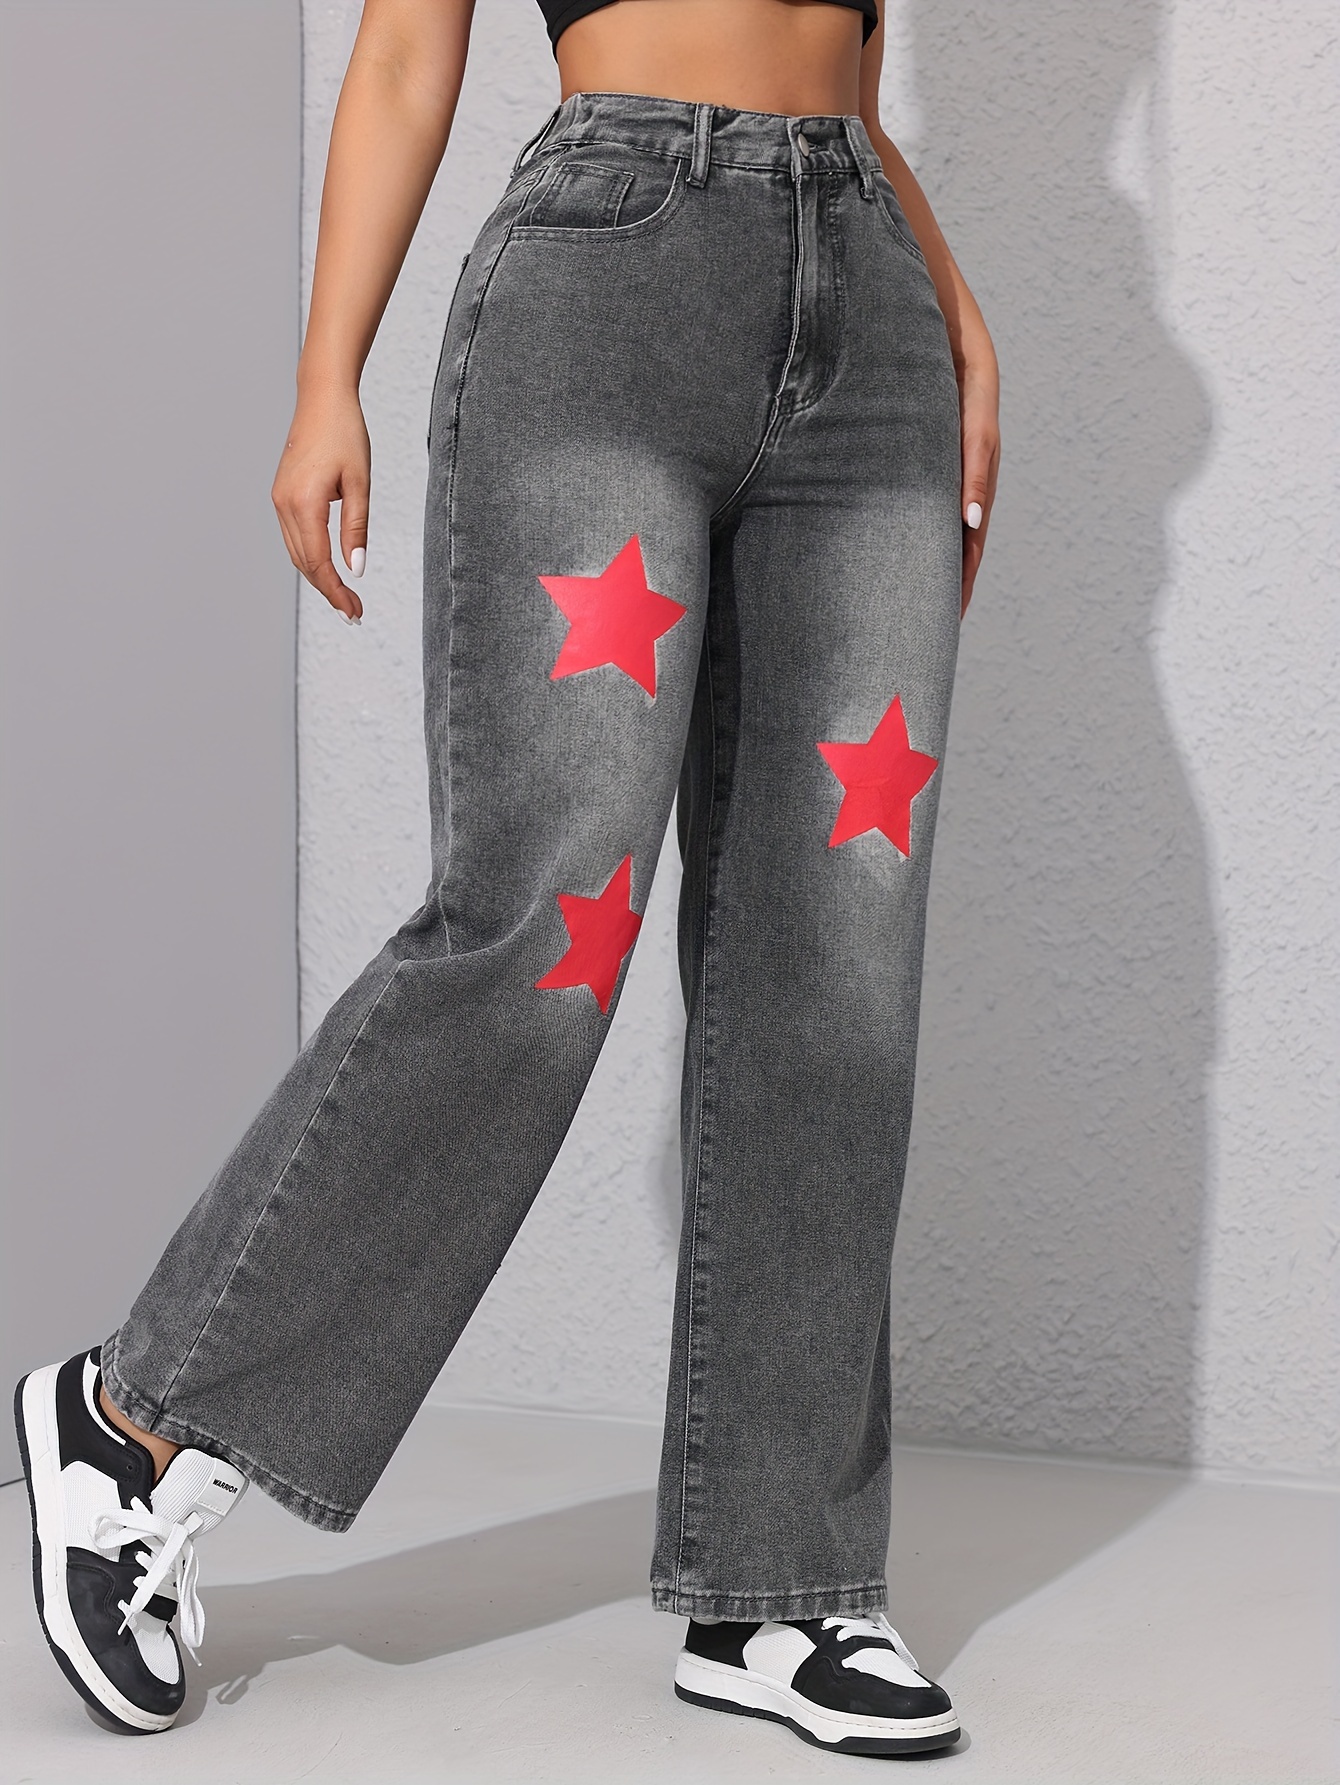 star printed casual women jeans